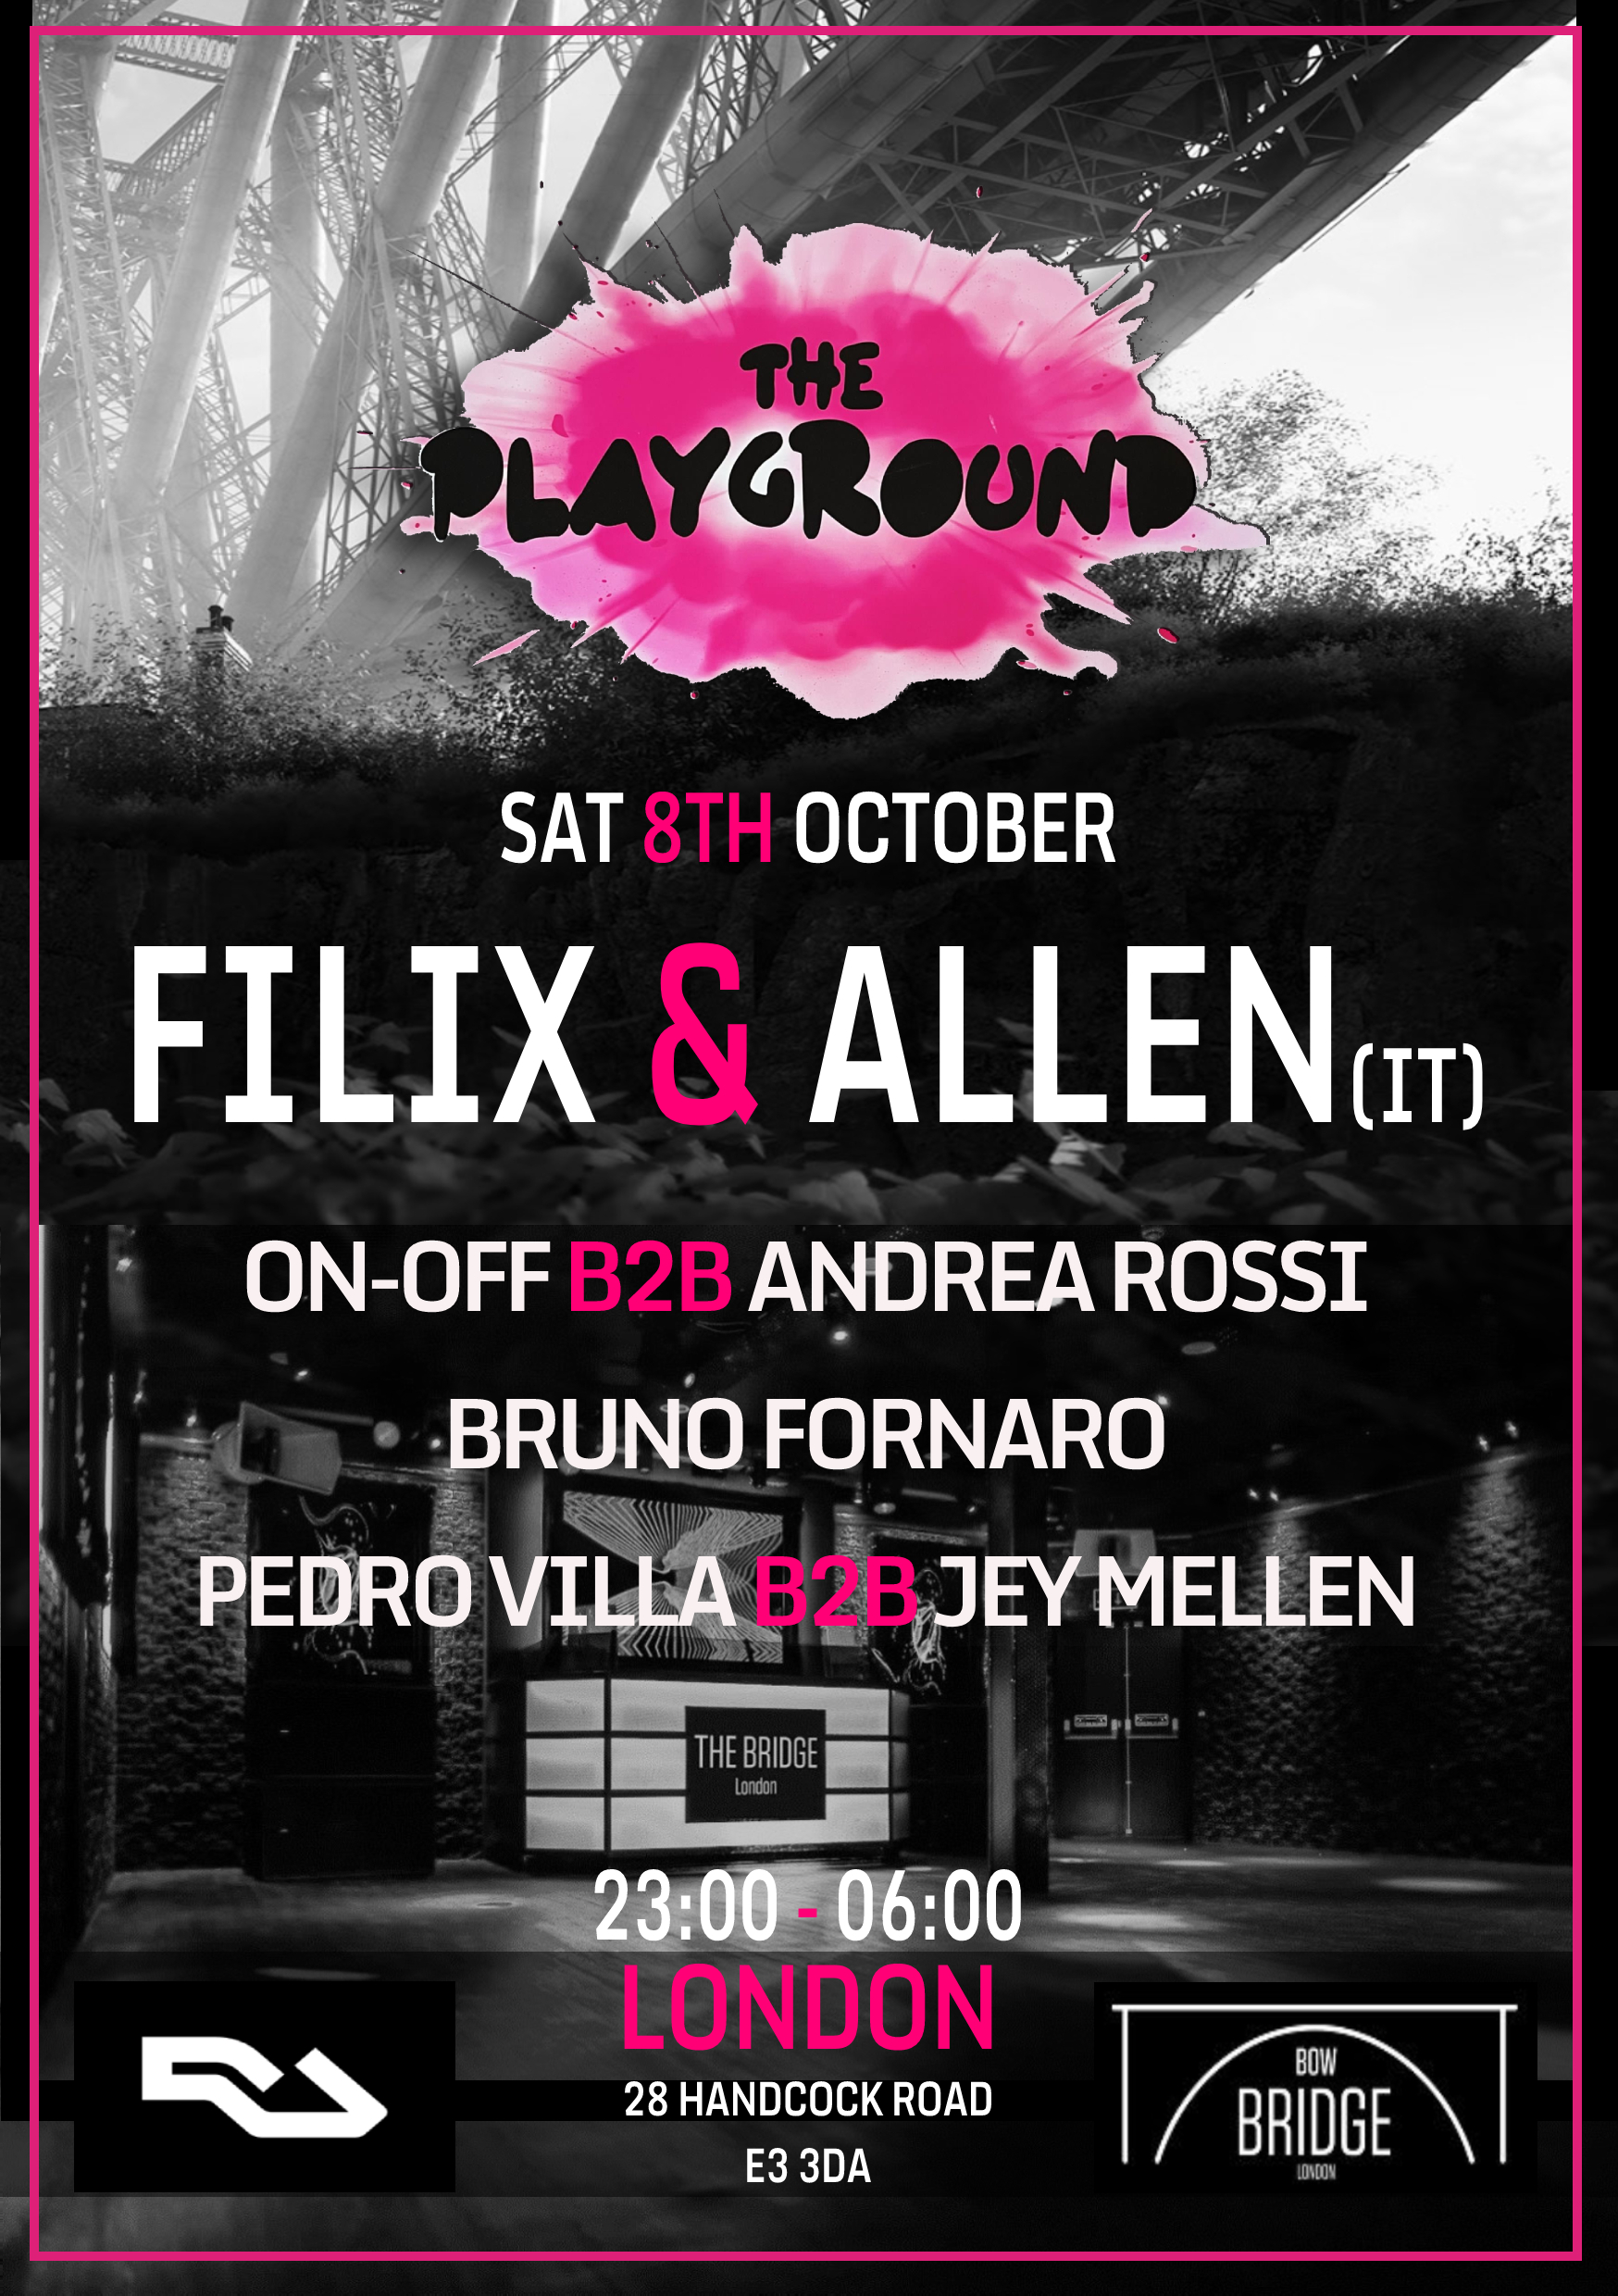 THE PLAYGROUND EVENTS with Allen & Filix - Flyer front